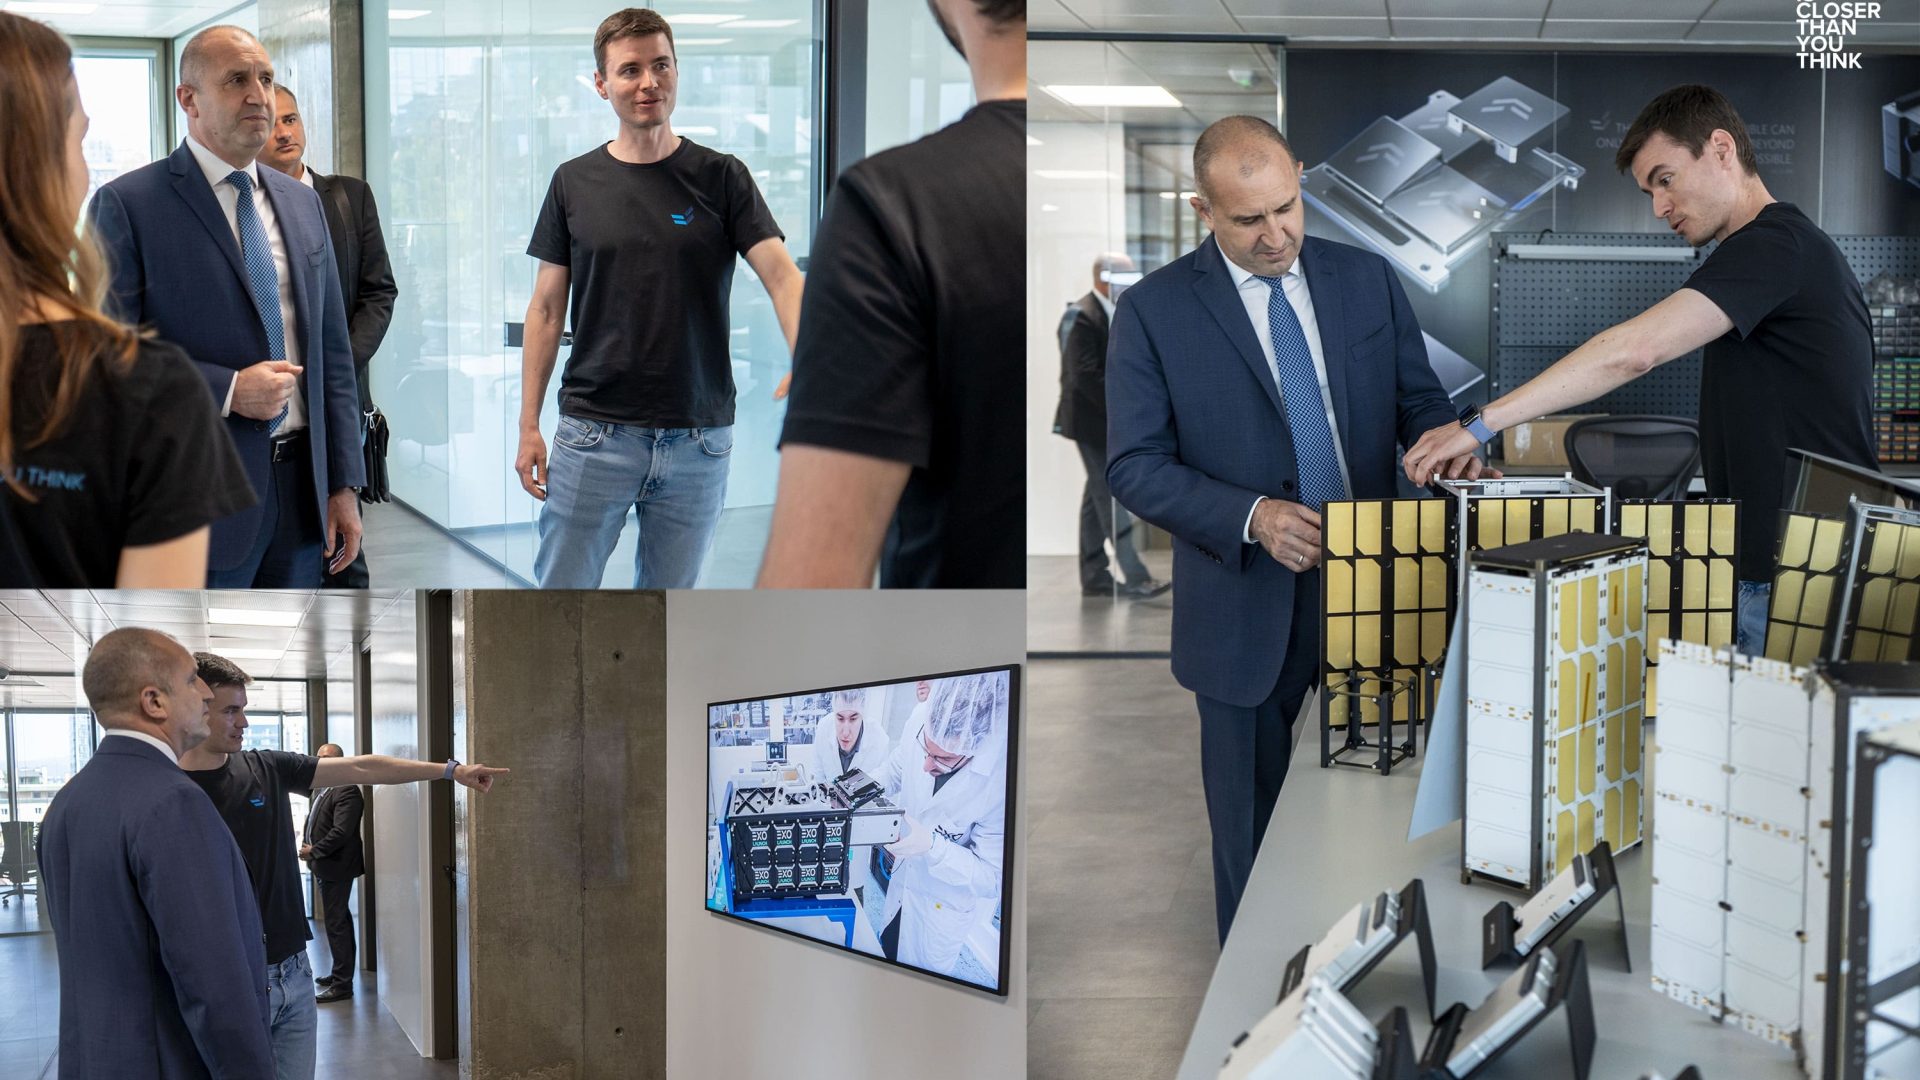 The President of Bulgaria Rumen Radev visits our Space HQ scaled